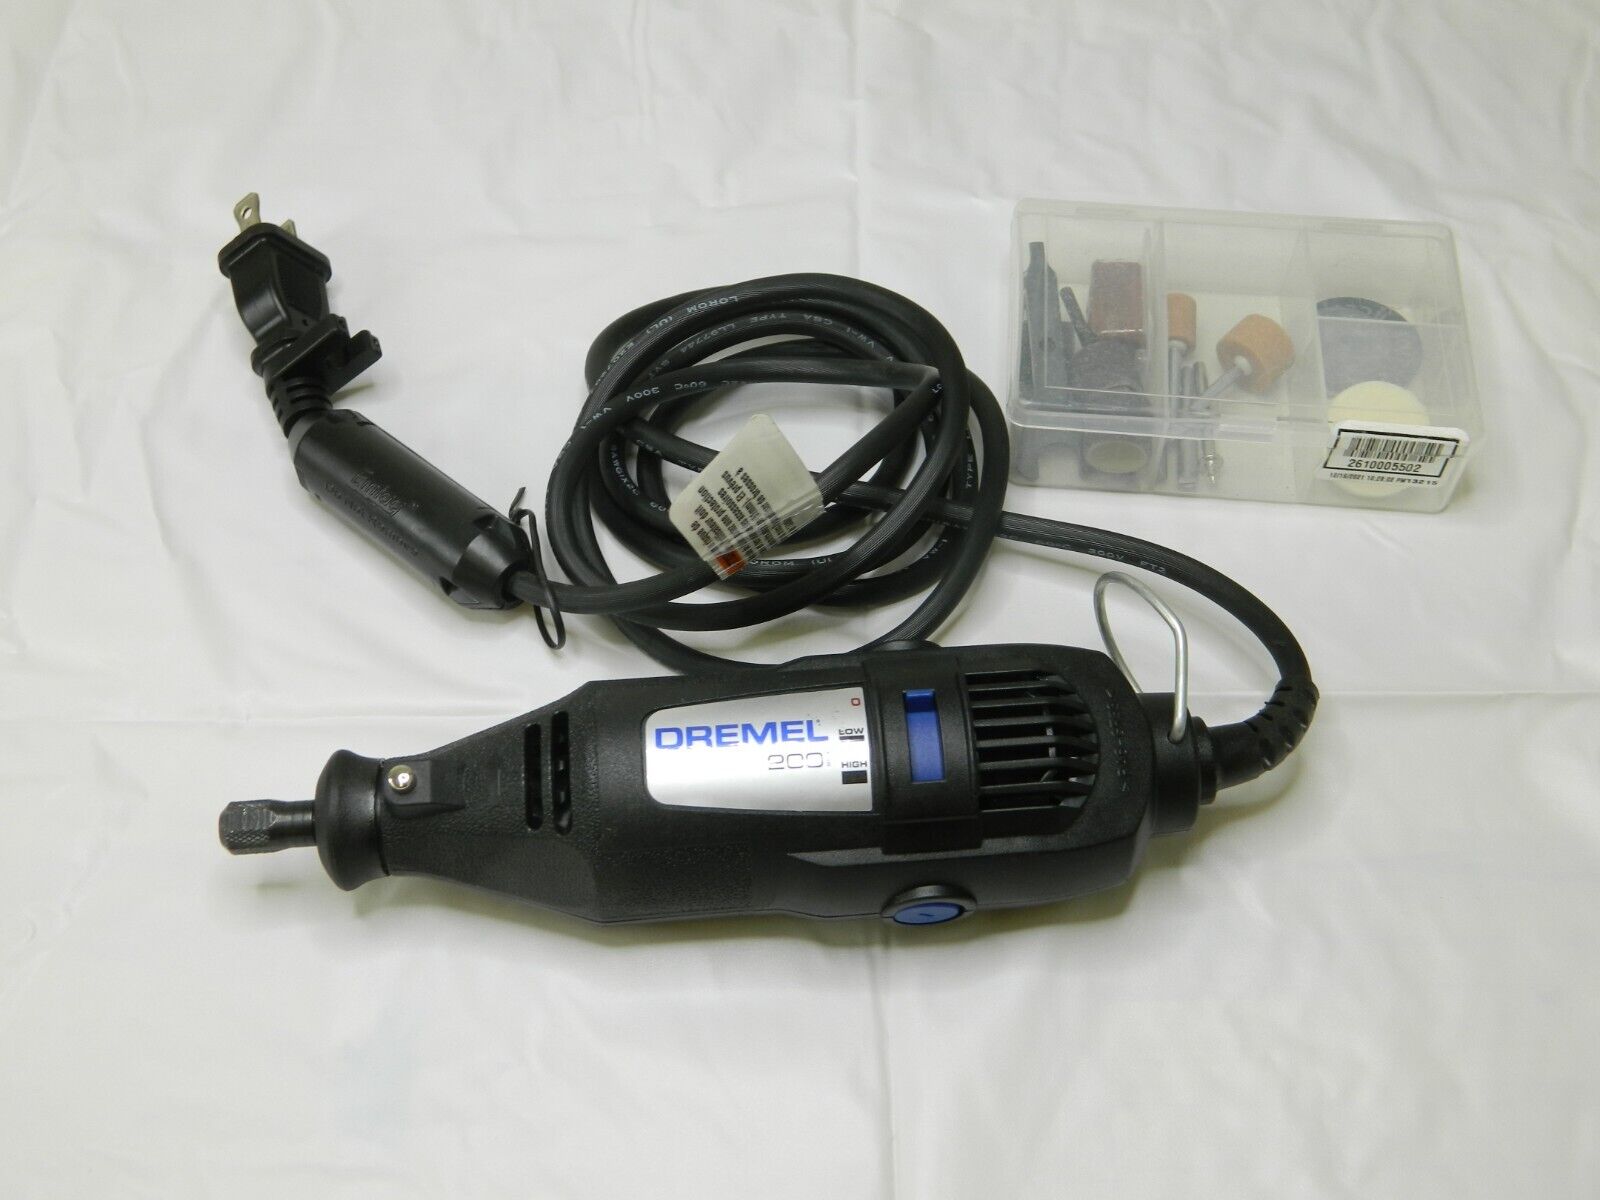 120 Volt Electric Rotary Tool Kit